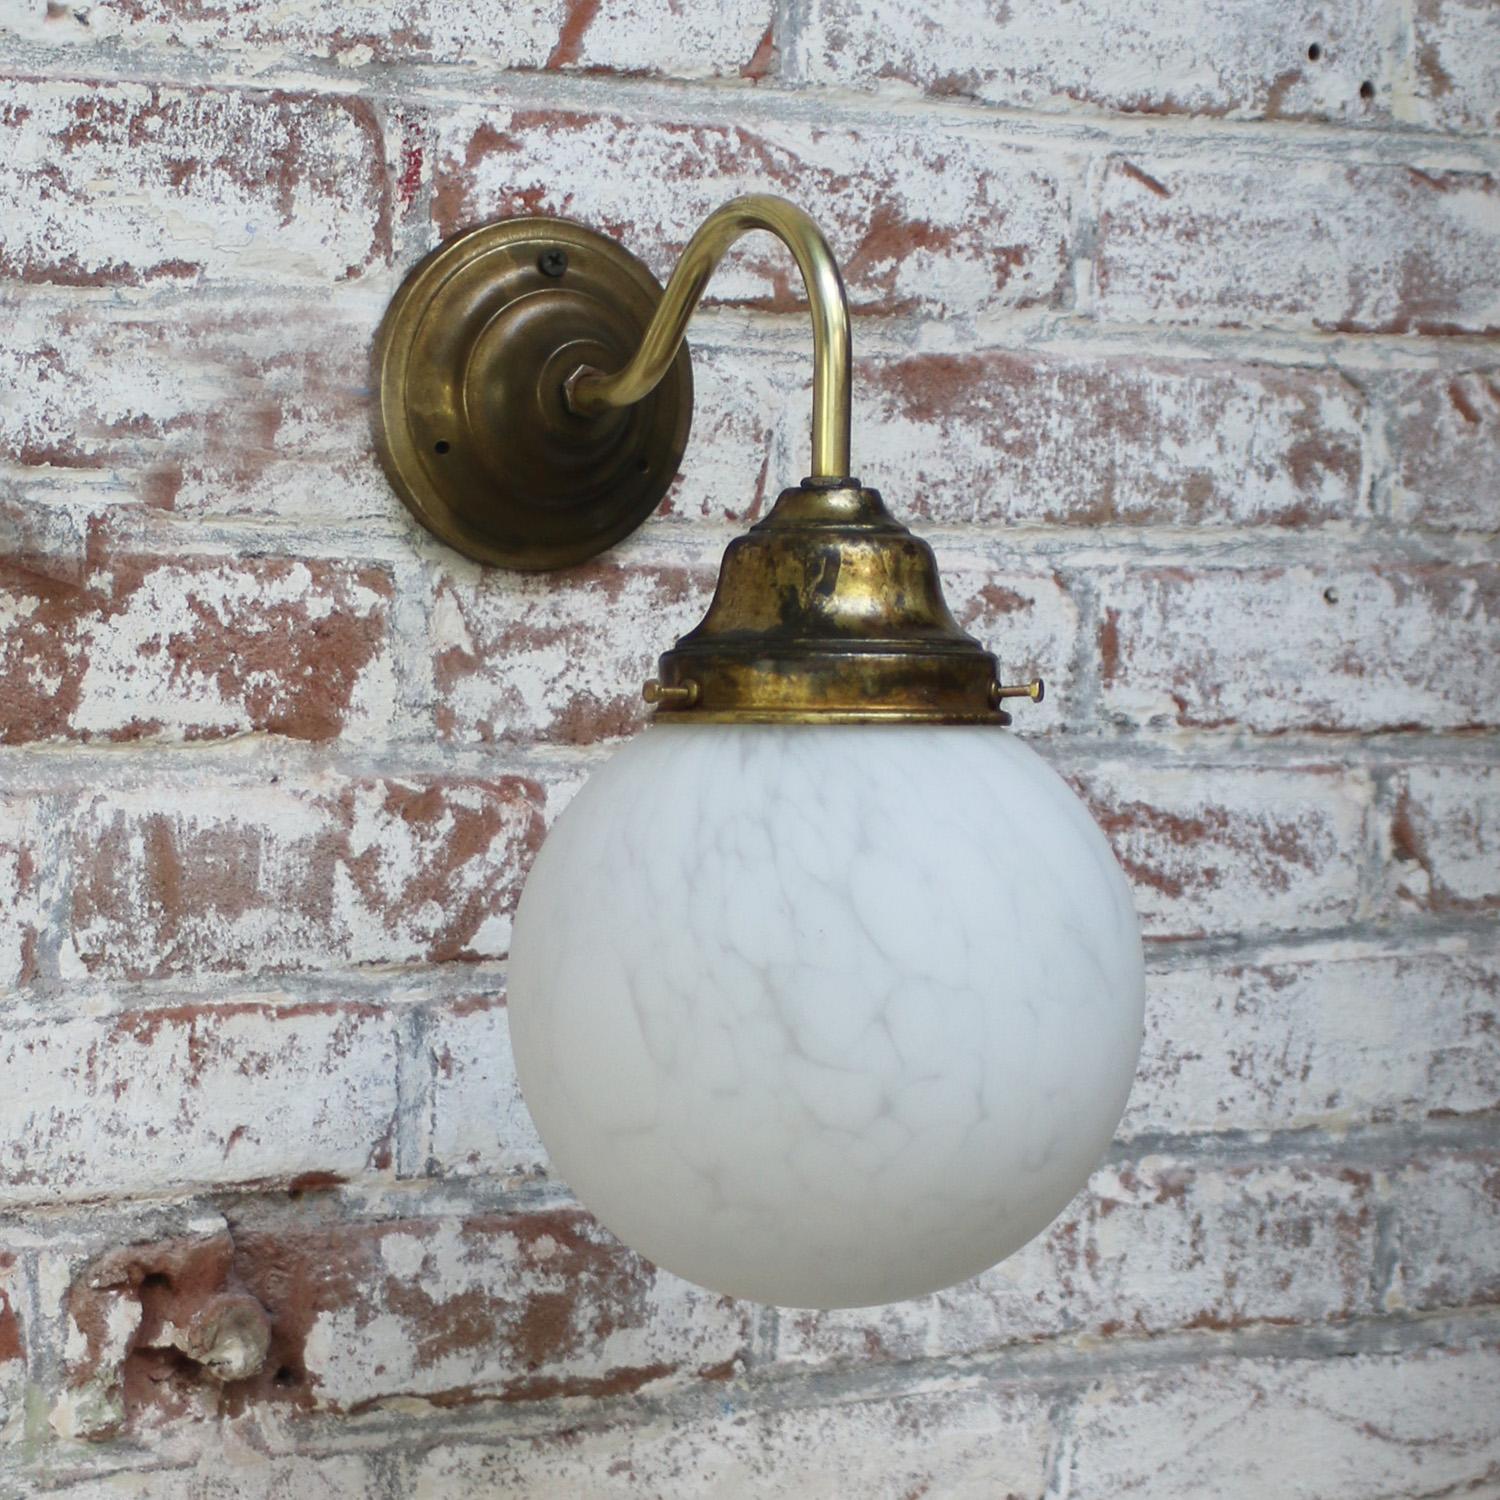 French wall lamp
White marble, opaline glass.
Brass wall piece and arm

diameter brass wall mount: 10 cm, 3 holes to secure

Weight: 0.70 kg / 1.5 lb

Priced per individual item. All lamps have been made suitable by international standards for